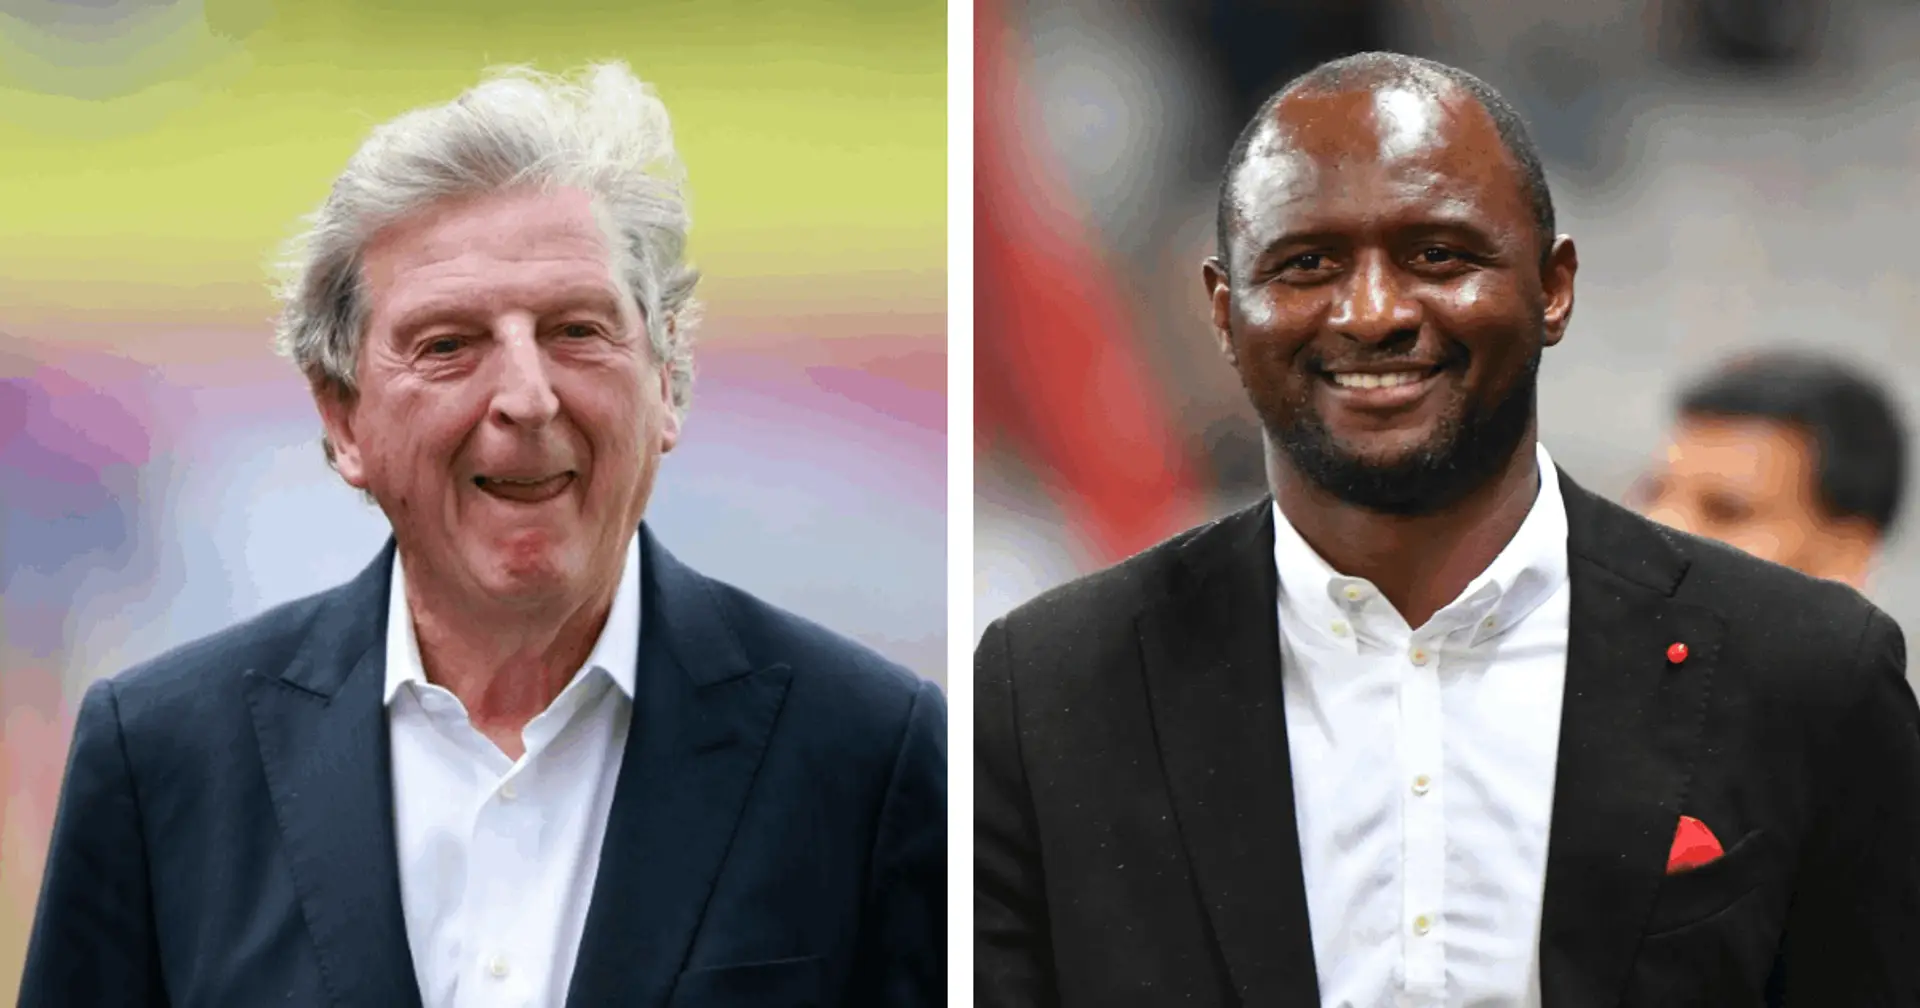 David Ornstein: Crystal Palace set to appoint Patrick Vieira as next manager